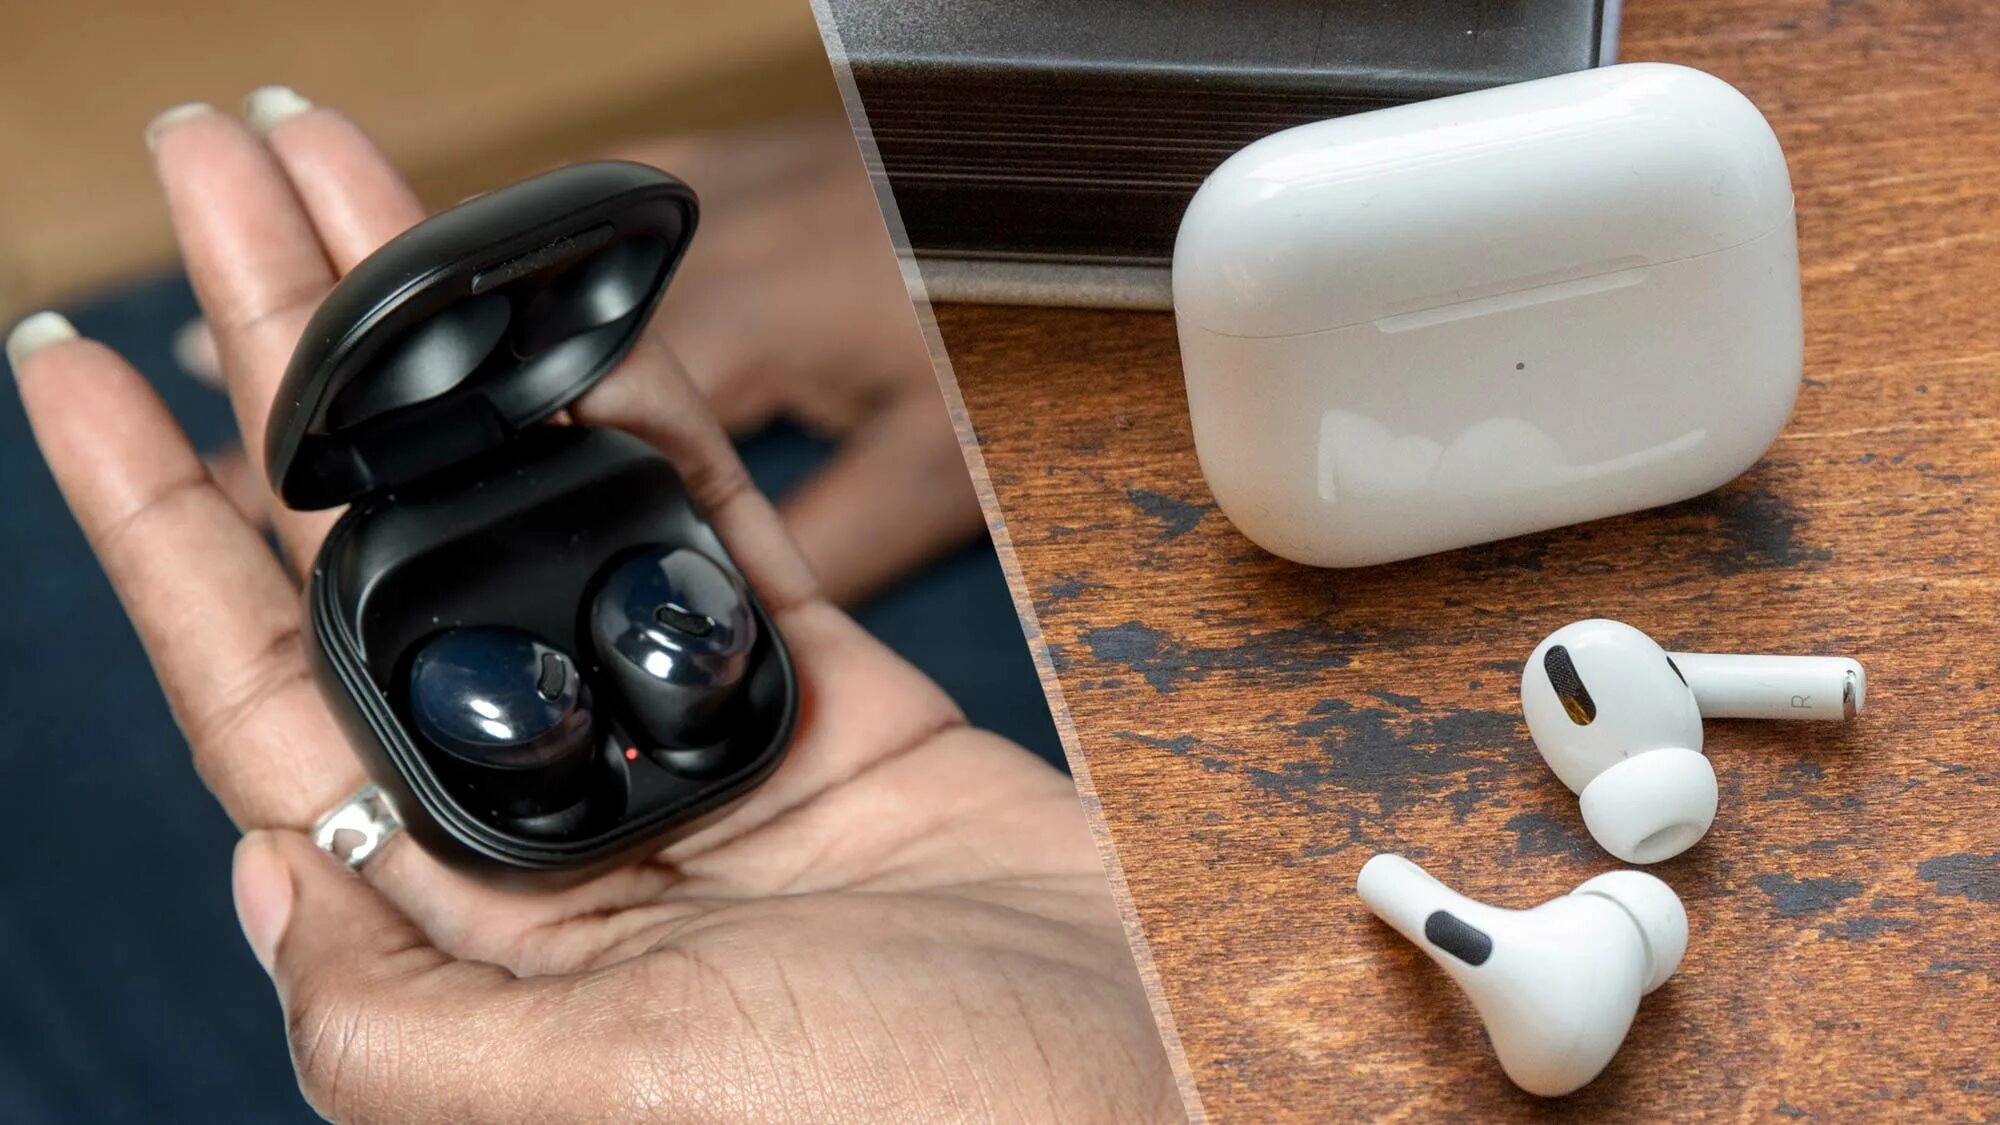 Xiaomi airpods pro. AIRPODS Samsung Galaxy Buds 2. Наушники самсунг Buds 2022. AIRPODS Pro Samsung Buds Pro. Samsung Galaxy pods Pro 2.